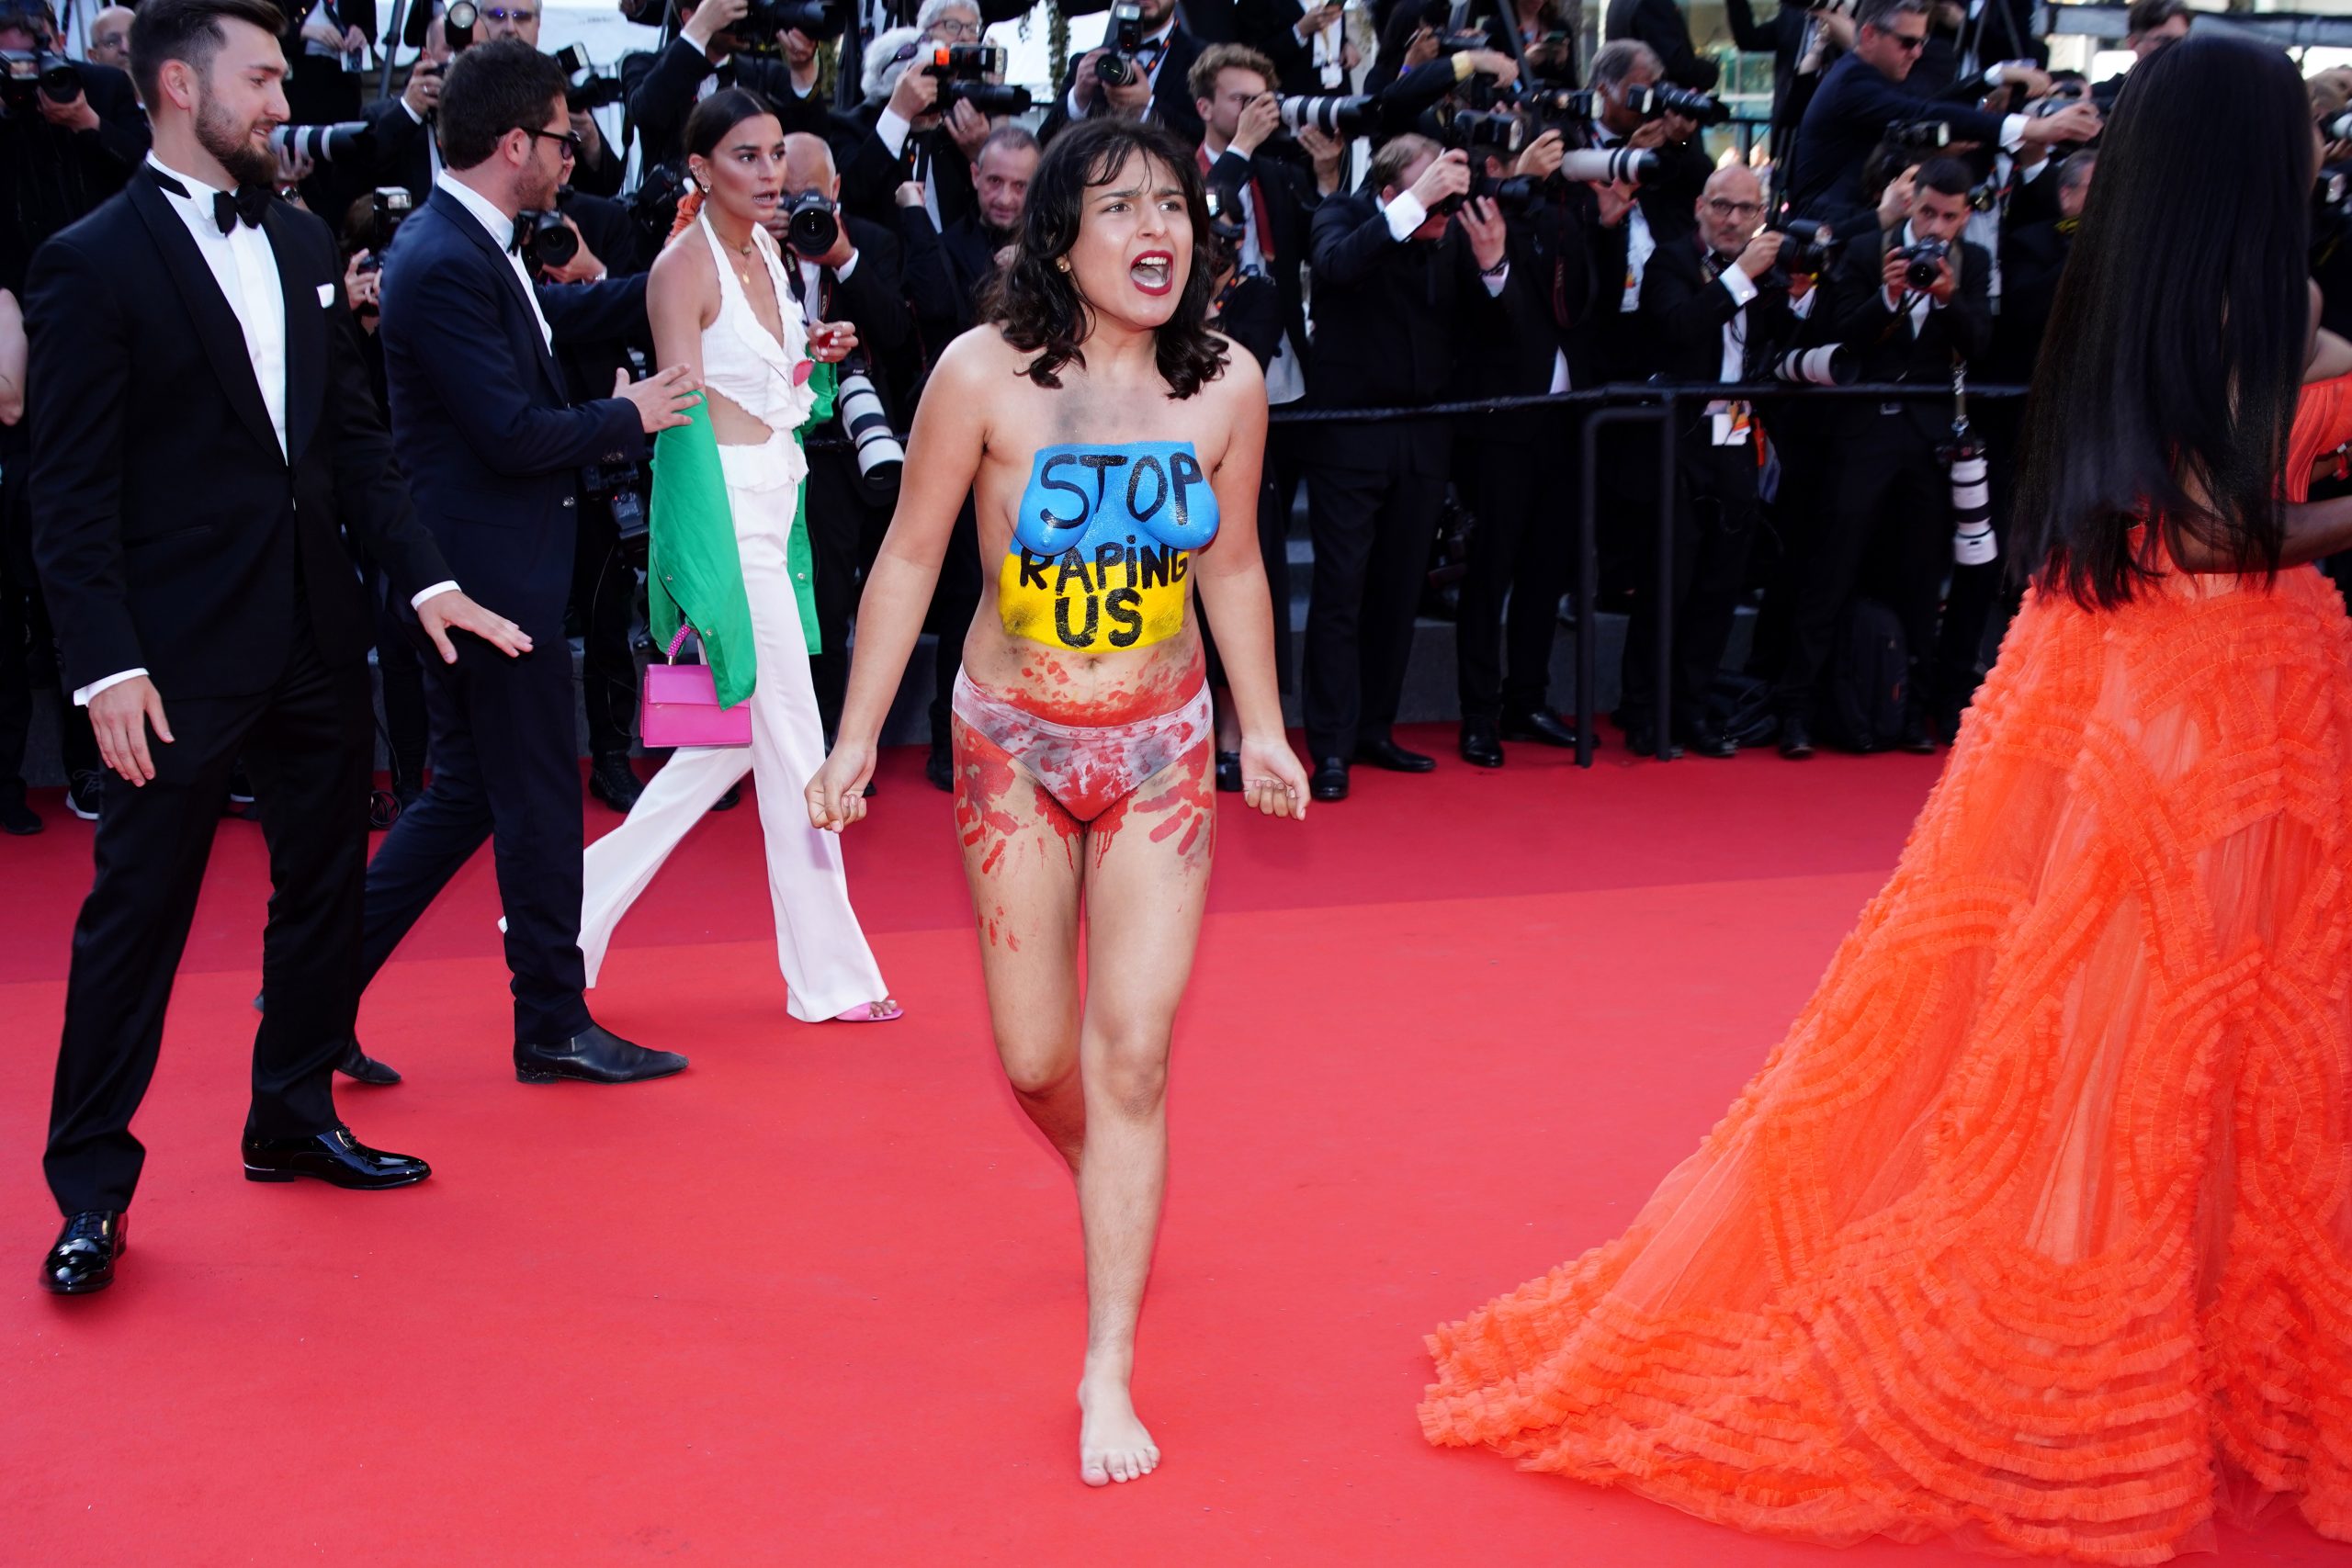 epa09961310 A half-naked protester (C) wearing body paint in the Ukrainiane national colors and writing reading 'Stop raping us' appears on the red carpet for the screening of 'Three Thousand Years of Longing' during the 75th annual Cannes Film Festival, in Cannes, France, 20 May 2022. The movie is presented out of competition at the festival which runs from 17 to 28 May.  EPA/CLEMENS BILAN